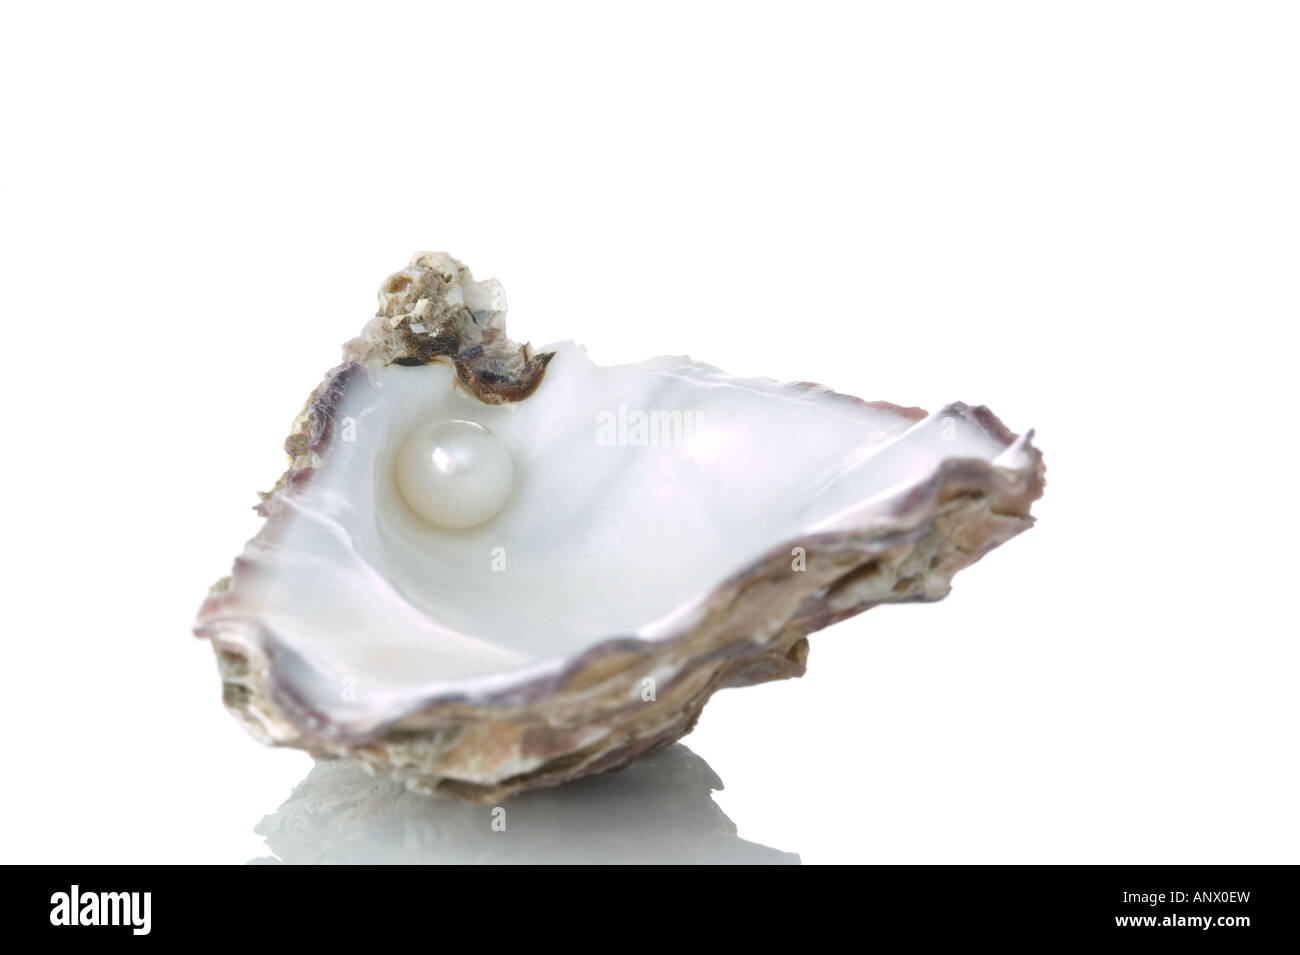 A Genuine Pearl in an empty Oyster shell isolated on a pure white background with slight reflection Stock Photo